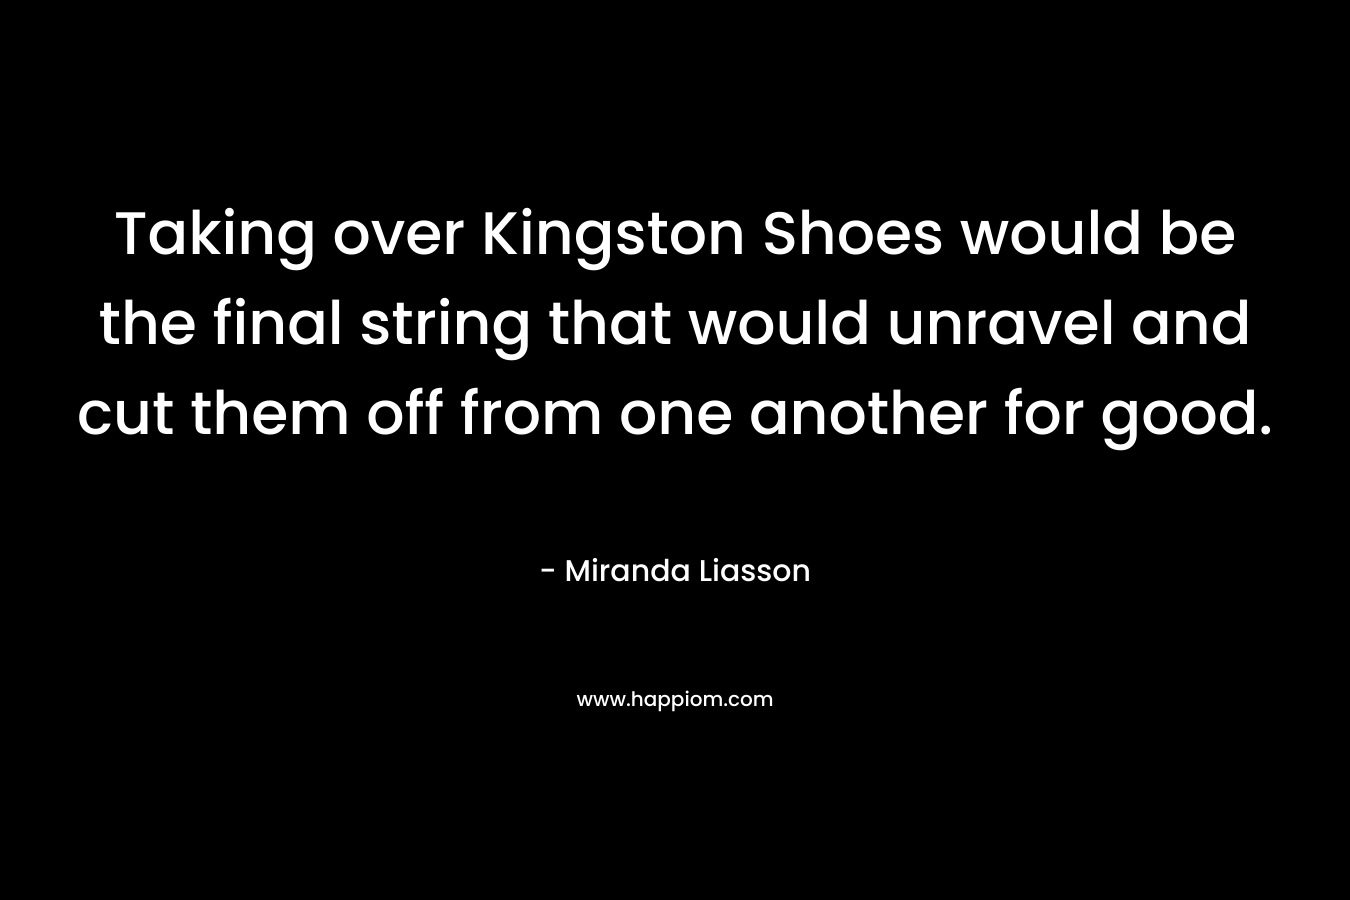 Taking over Kingston Shoes would be the final string that would unravel and cut them off from one another for good. – Miranda Liasson